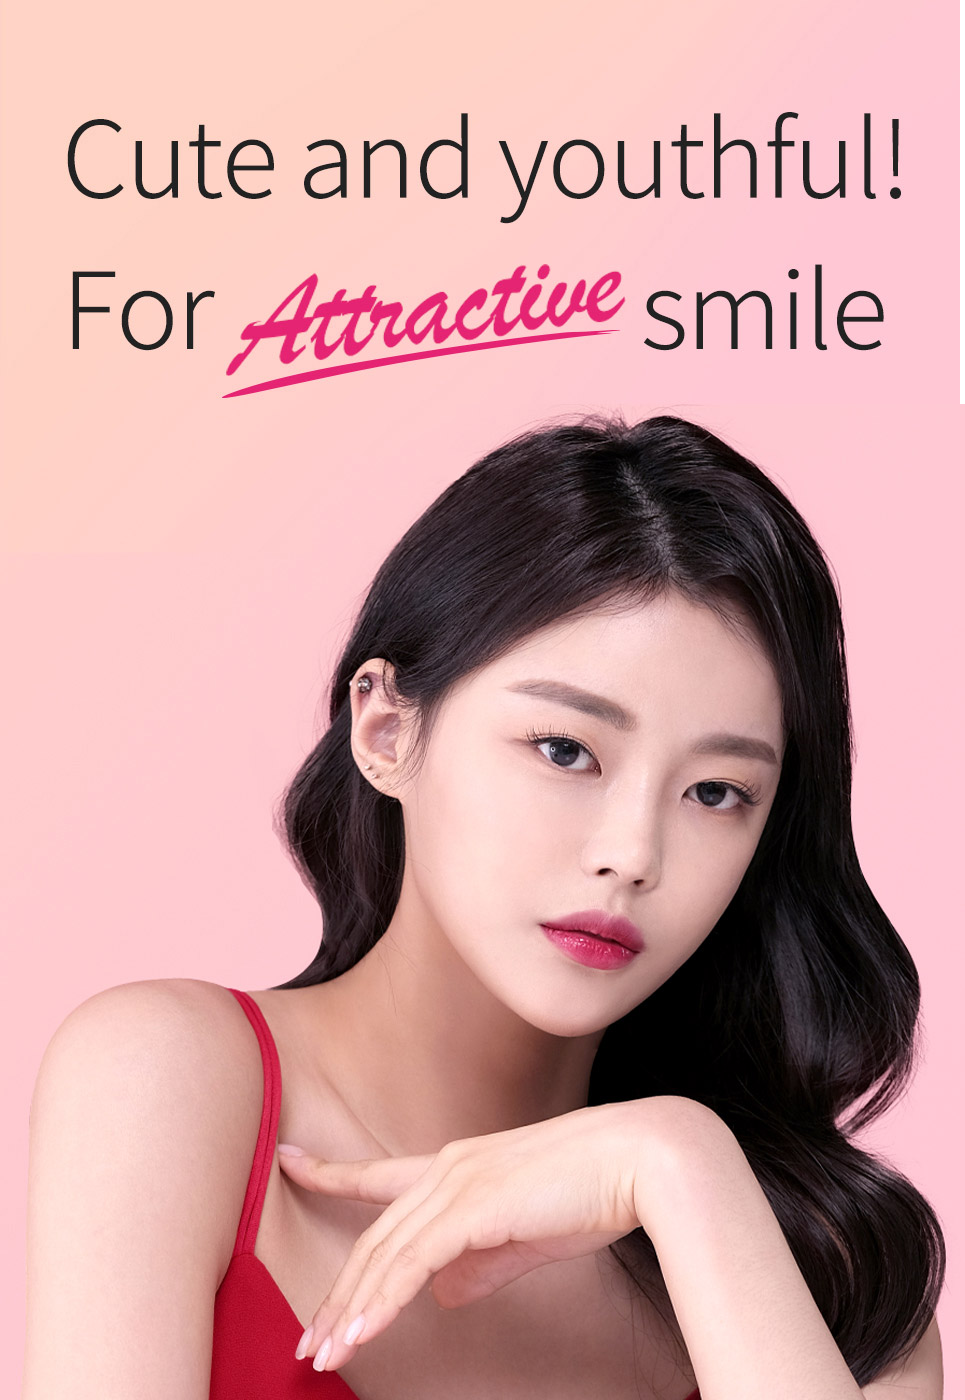 Cute and youthful! For Attractive smile